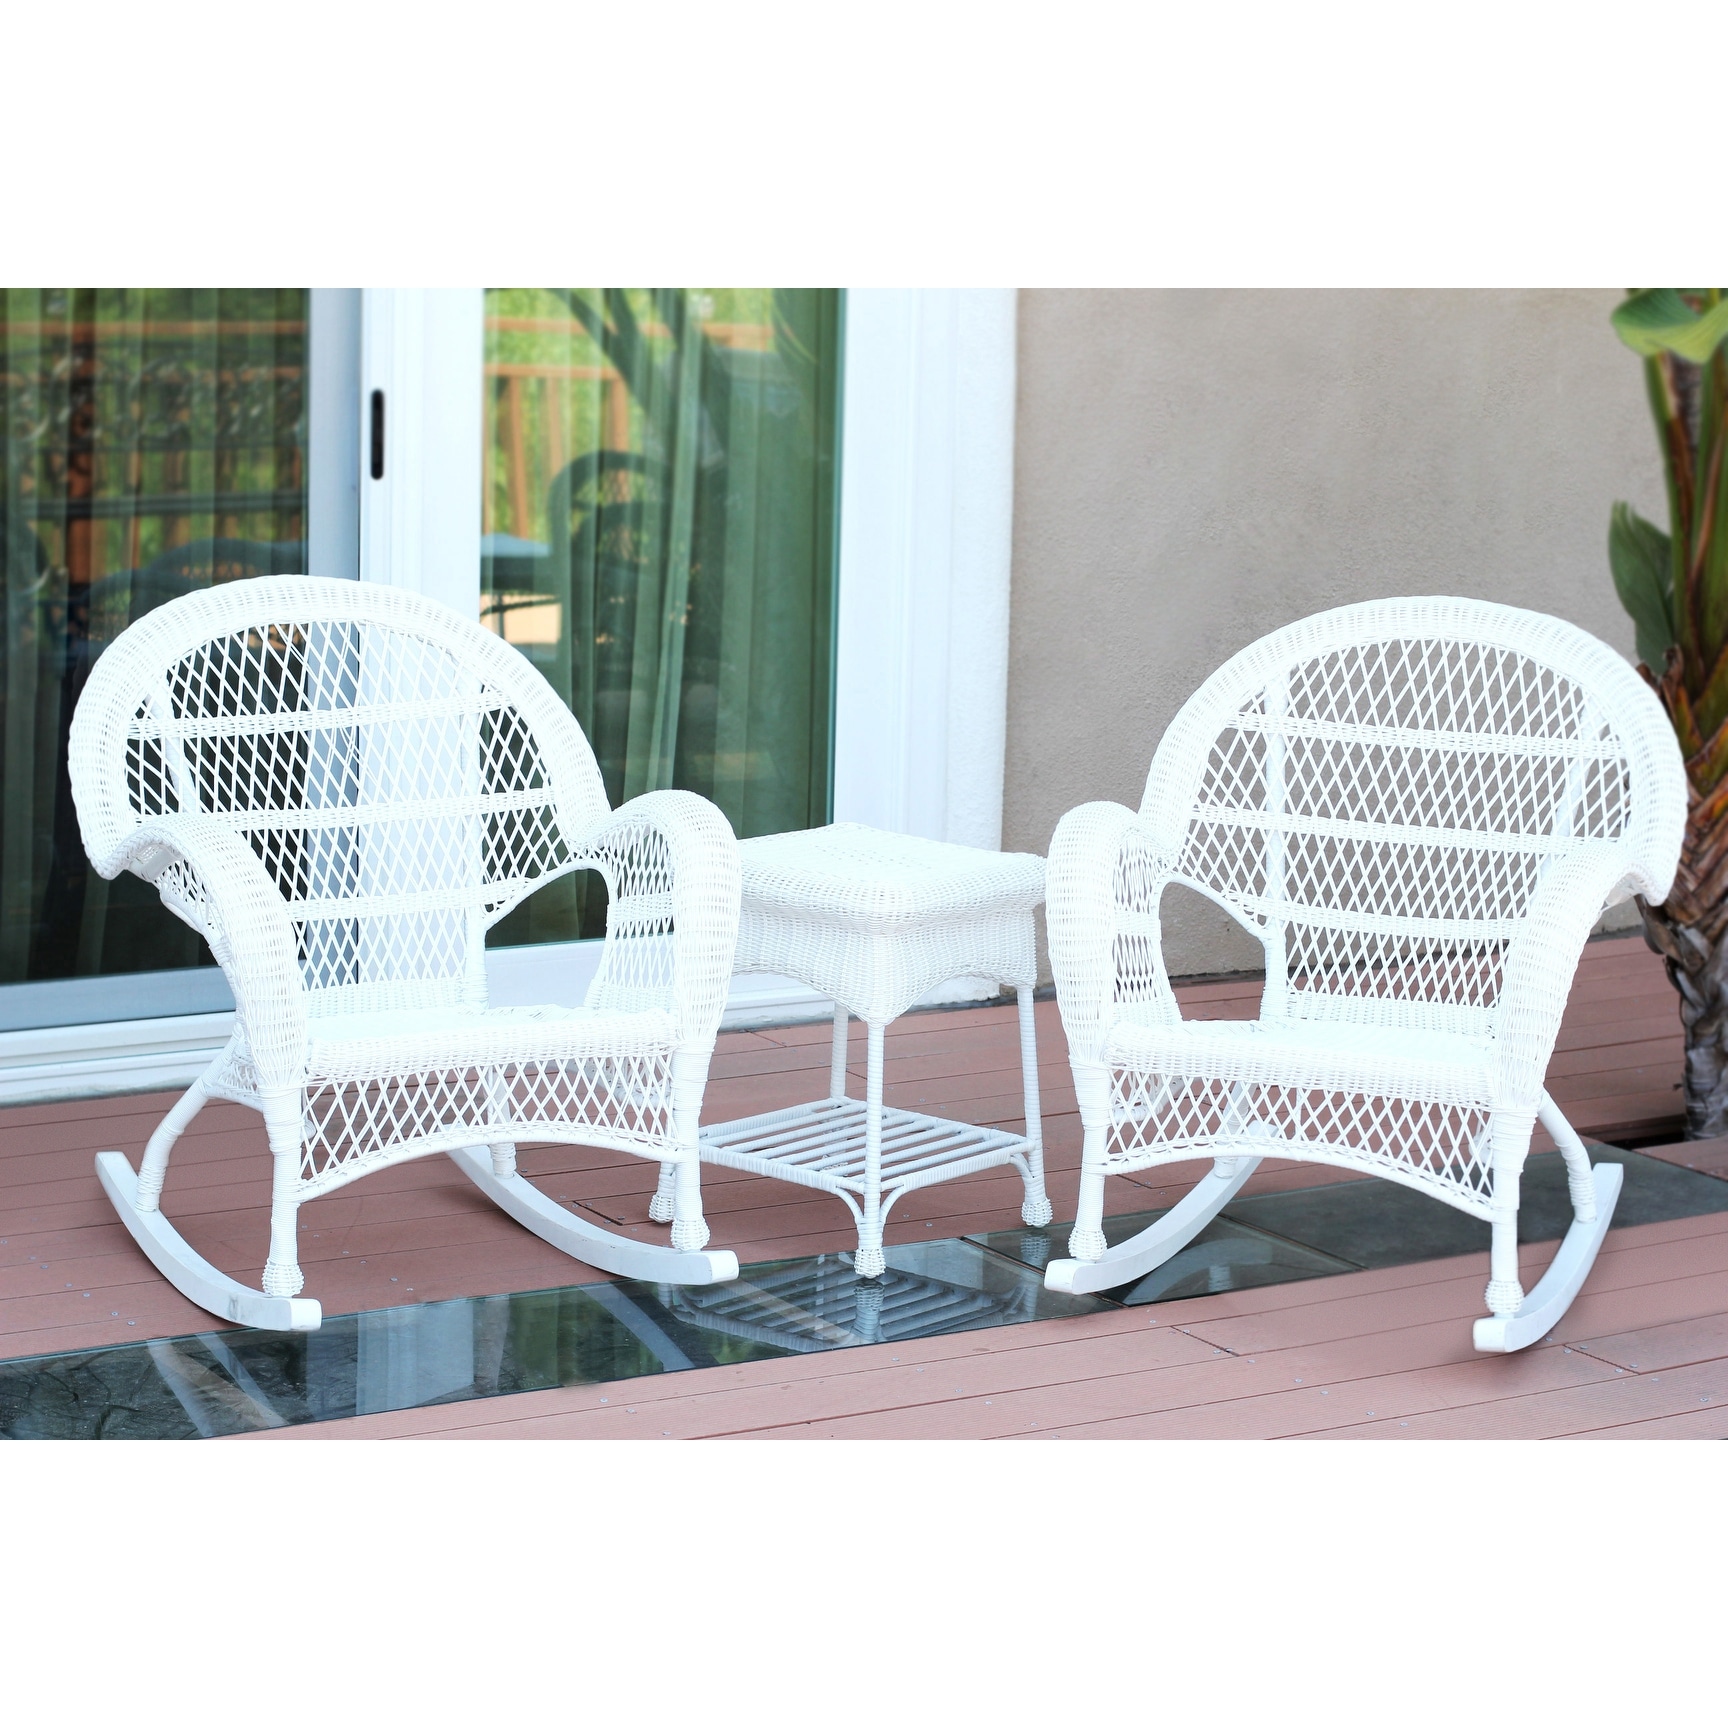 Jeco Santa Maria White Rocker Wicker Chair and End Table Set White- No Cushions - image 1 of 5